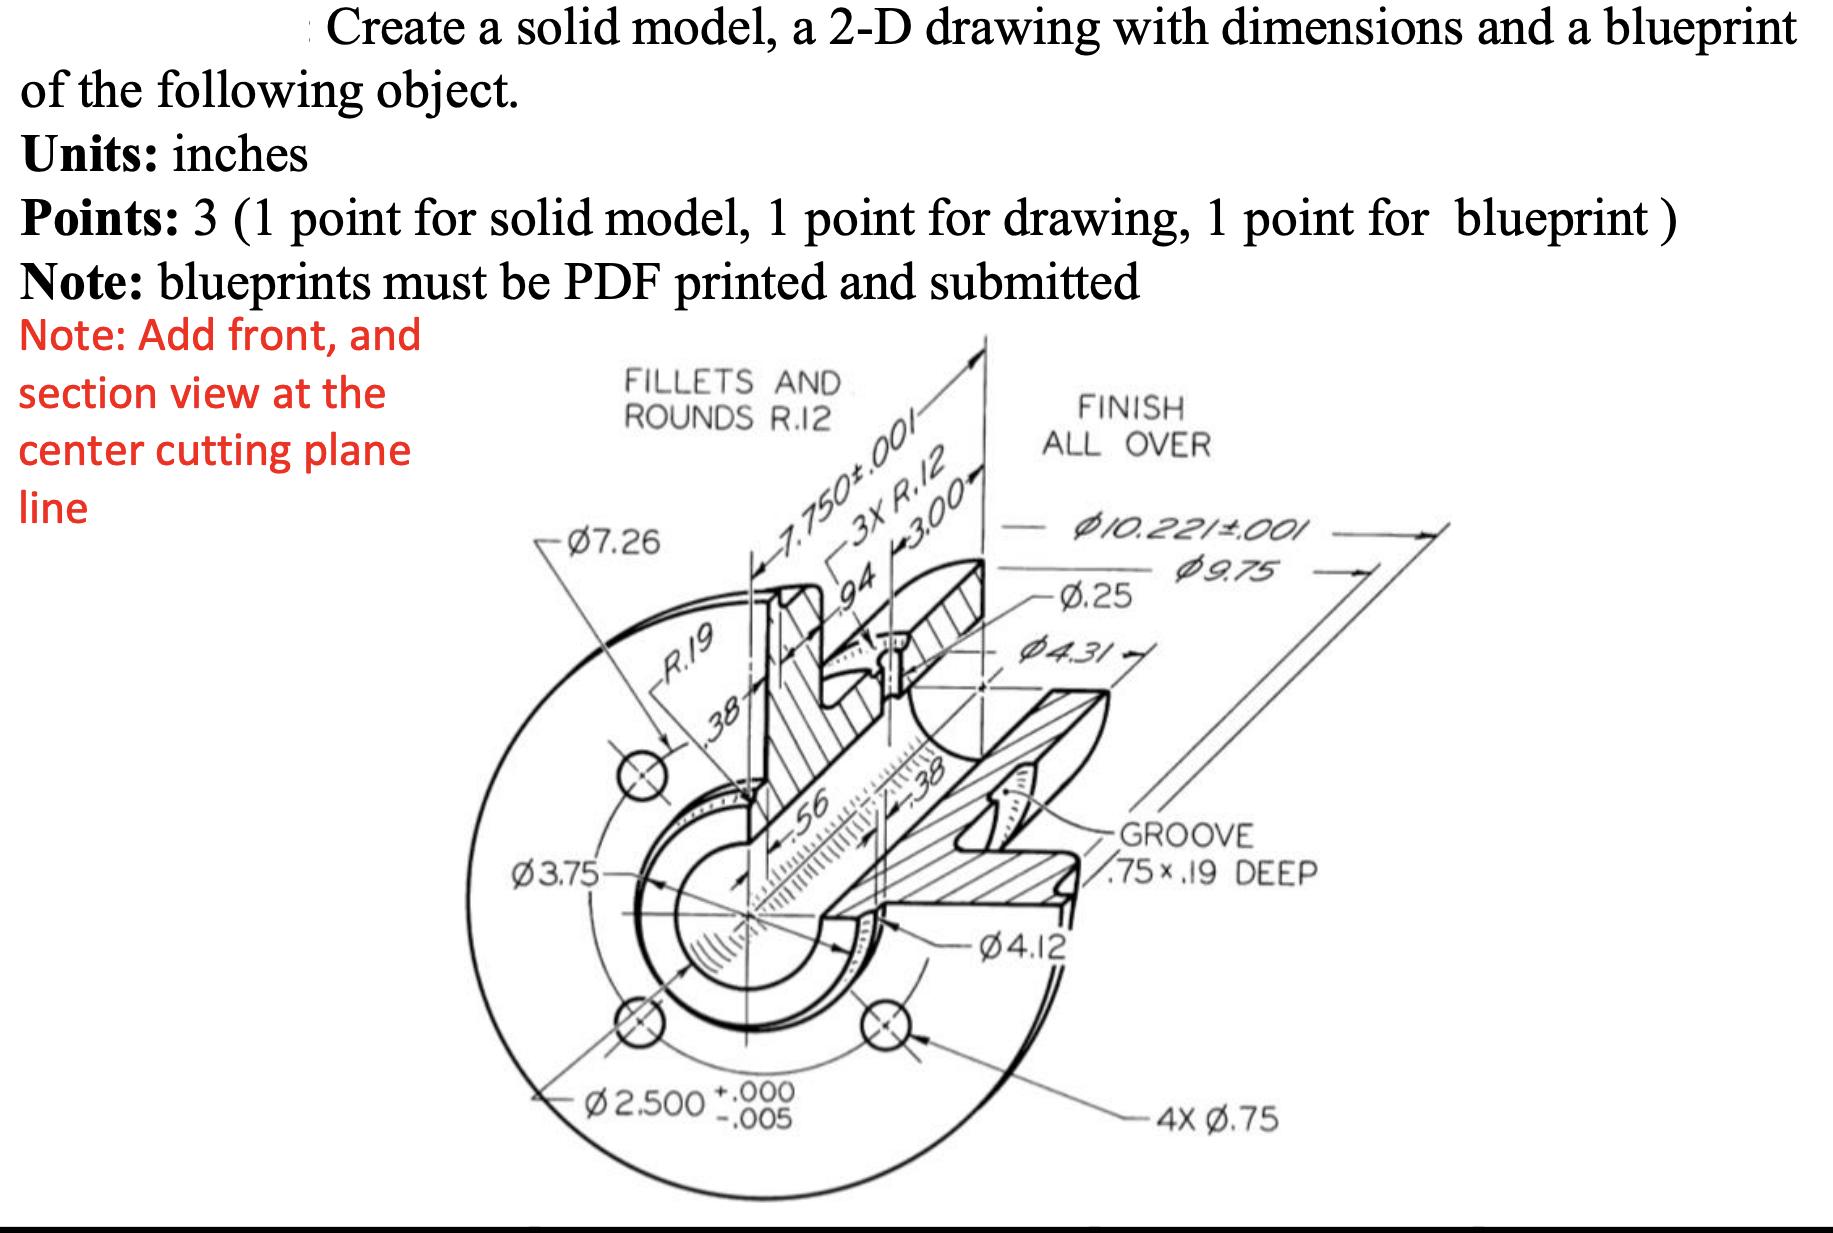 Create a solid model, a 2-D drawing with dimensions and a blueprint of the following object. Units: inches